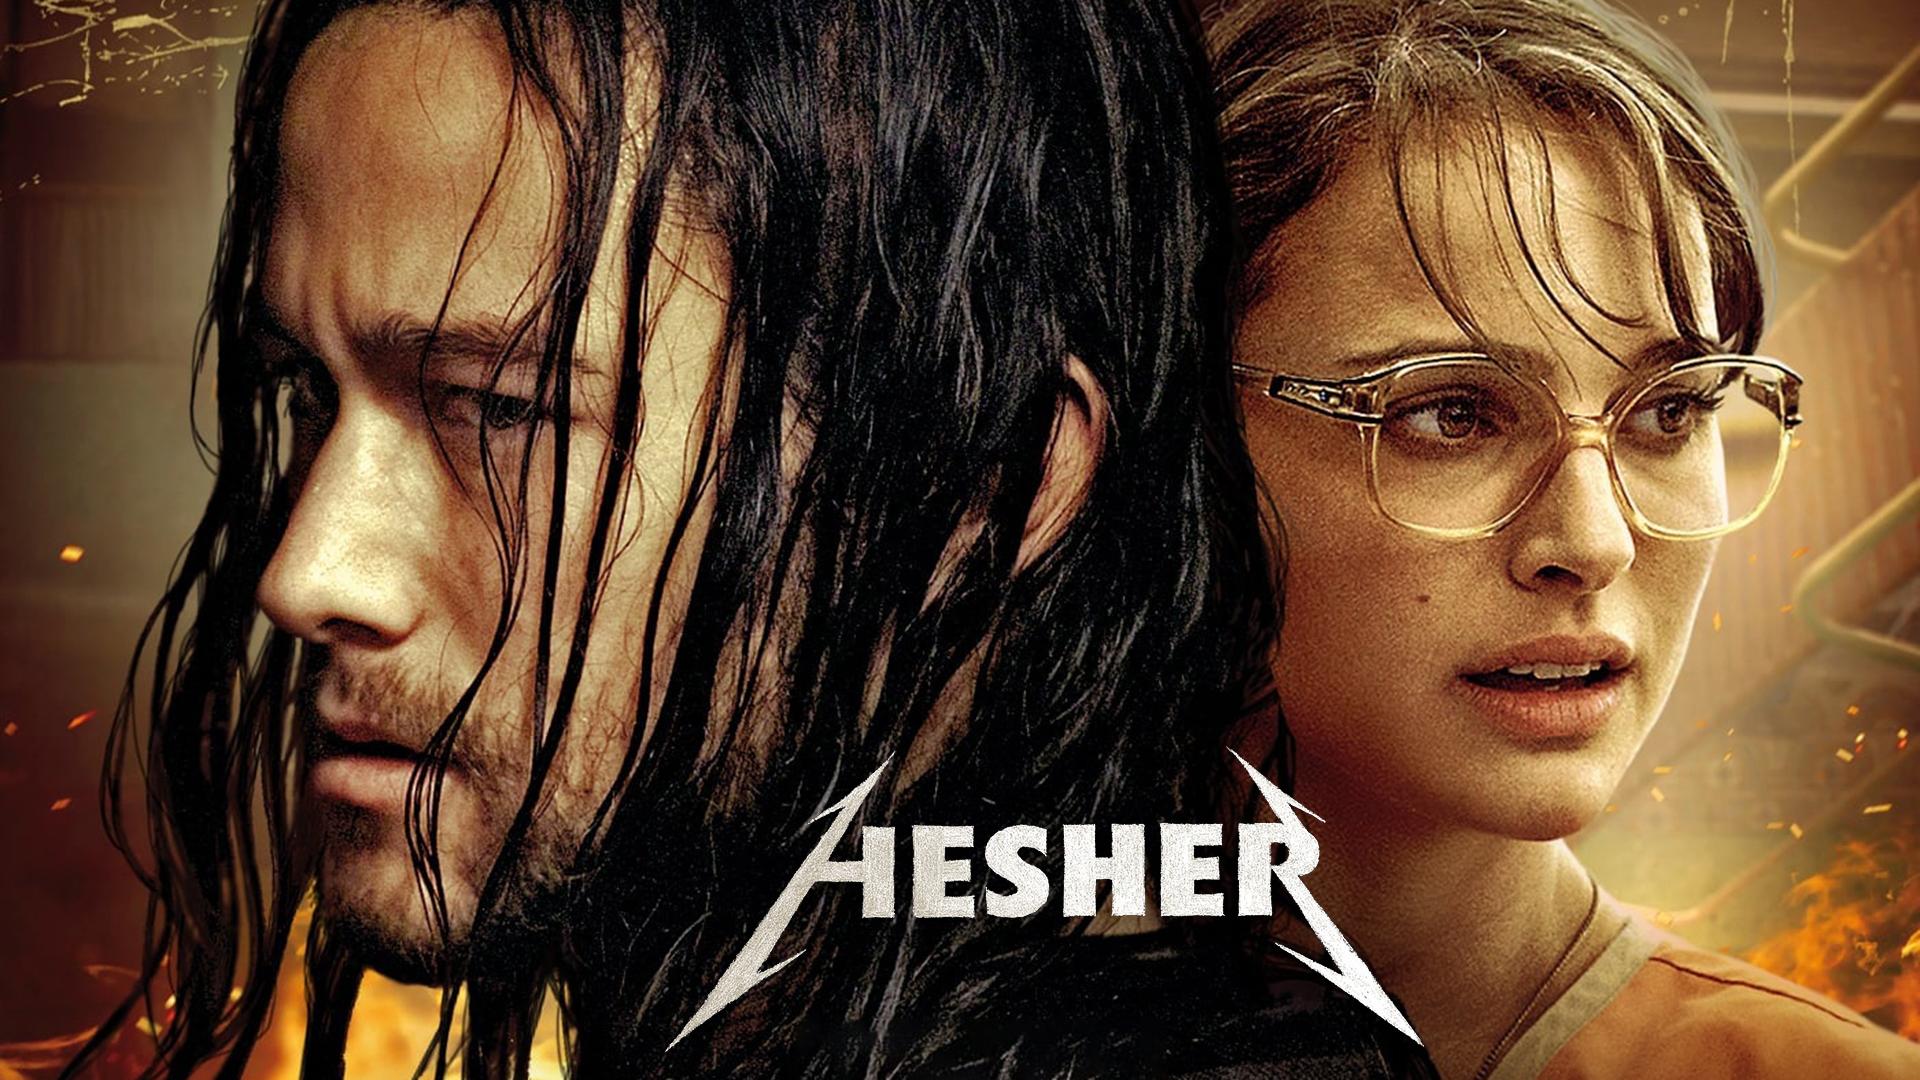 The story and meaning of the song 'Hesher - Wallpaper. '